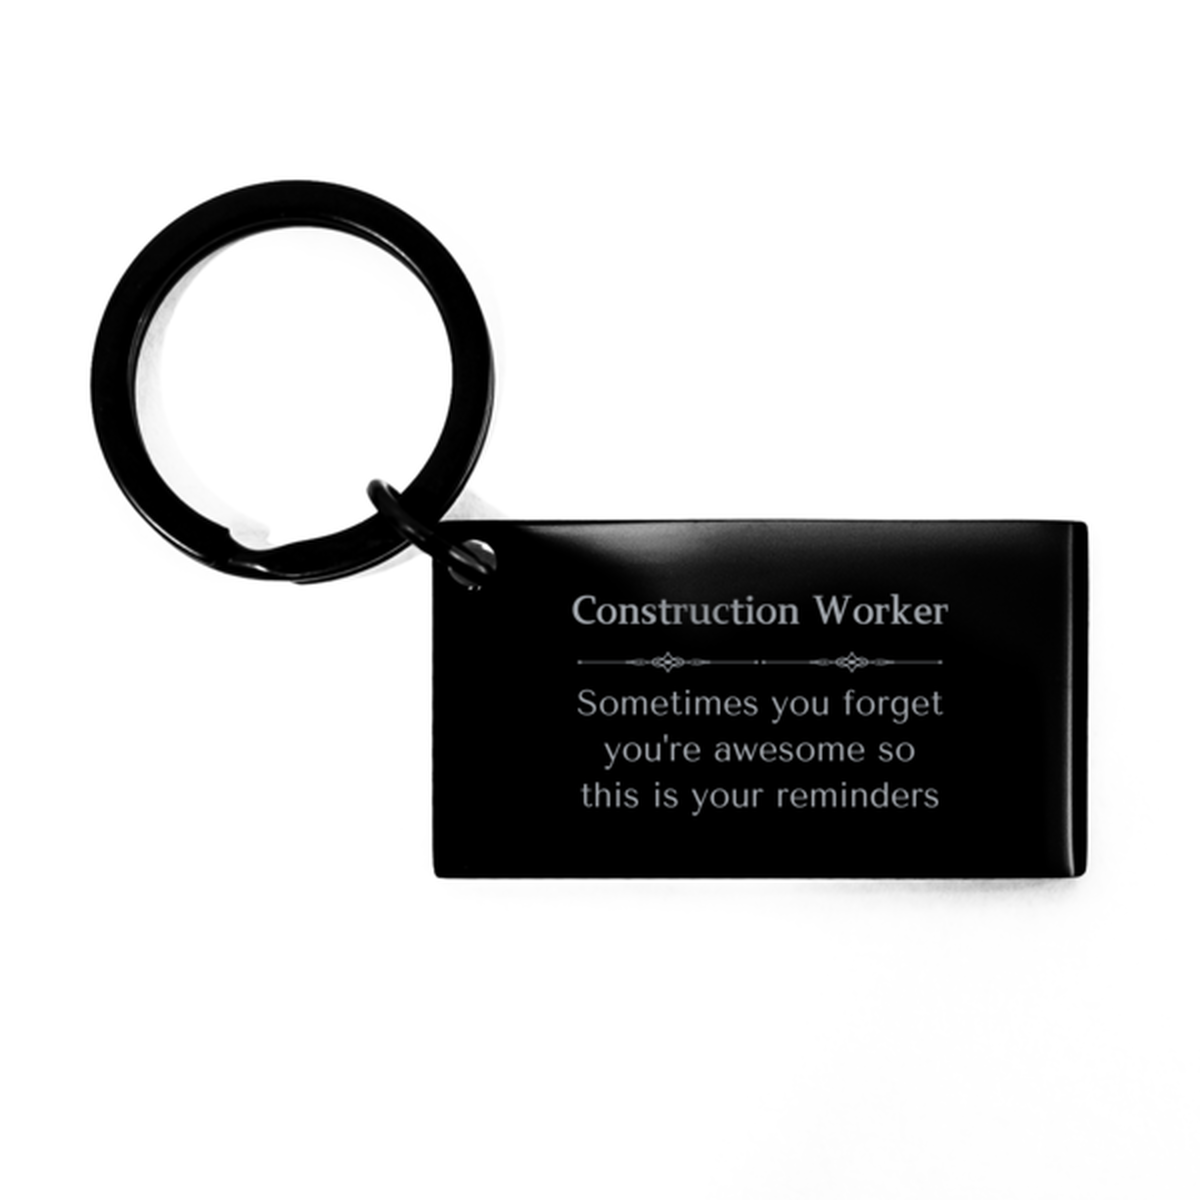 Sentimental Construction Worker Keychain, Executive Sometimes you forget you're awesome so this is your reminders, Graduation Christmas Birthday Gifts for Construction Worker, Men, Women, Coworkers